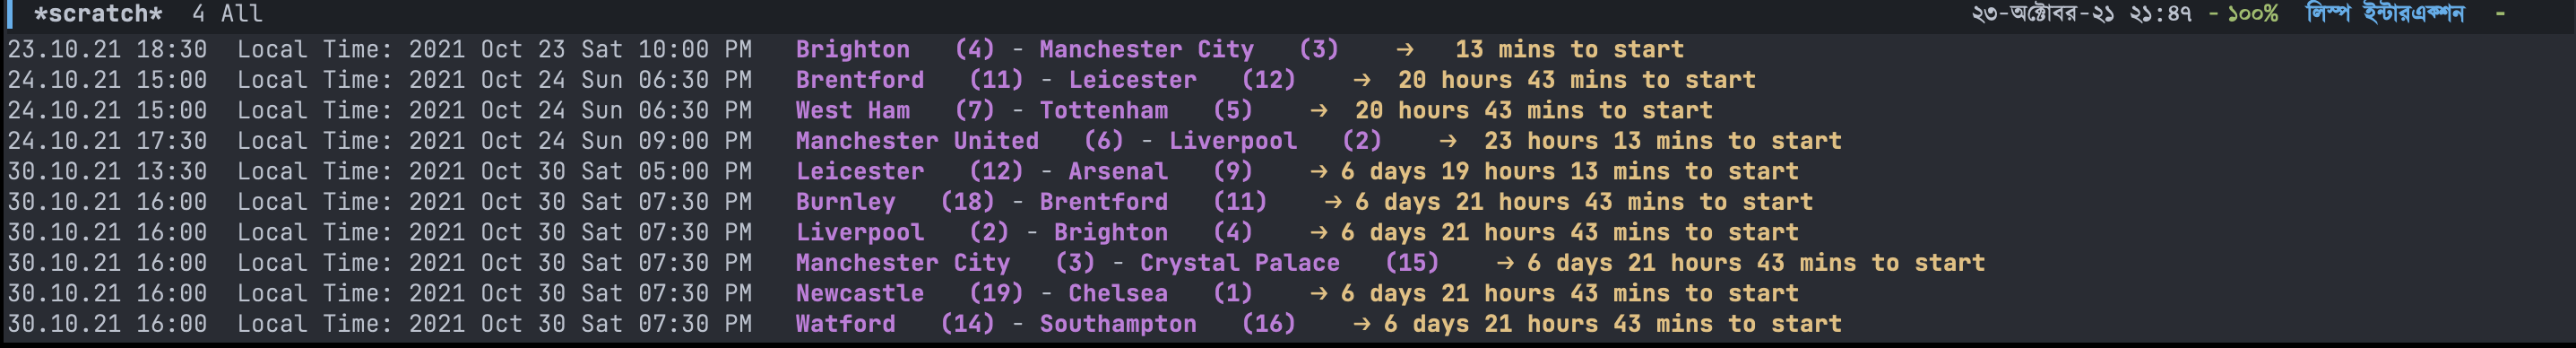 fixtures-all-clubs.png